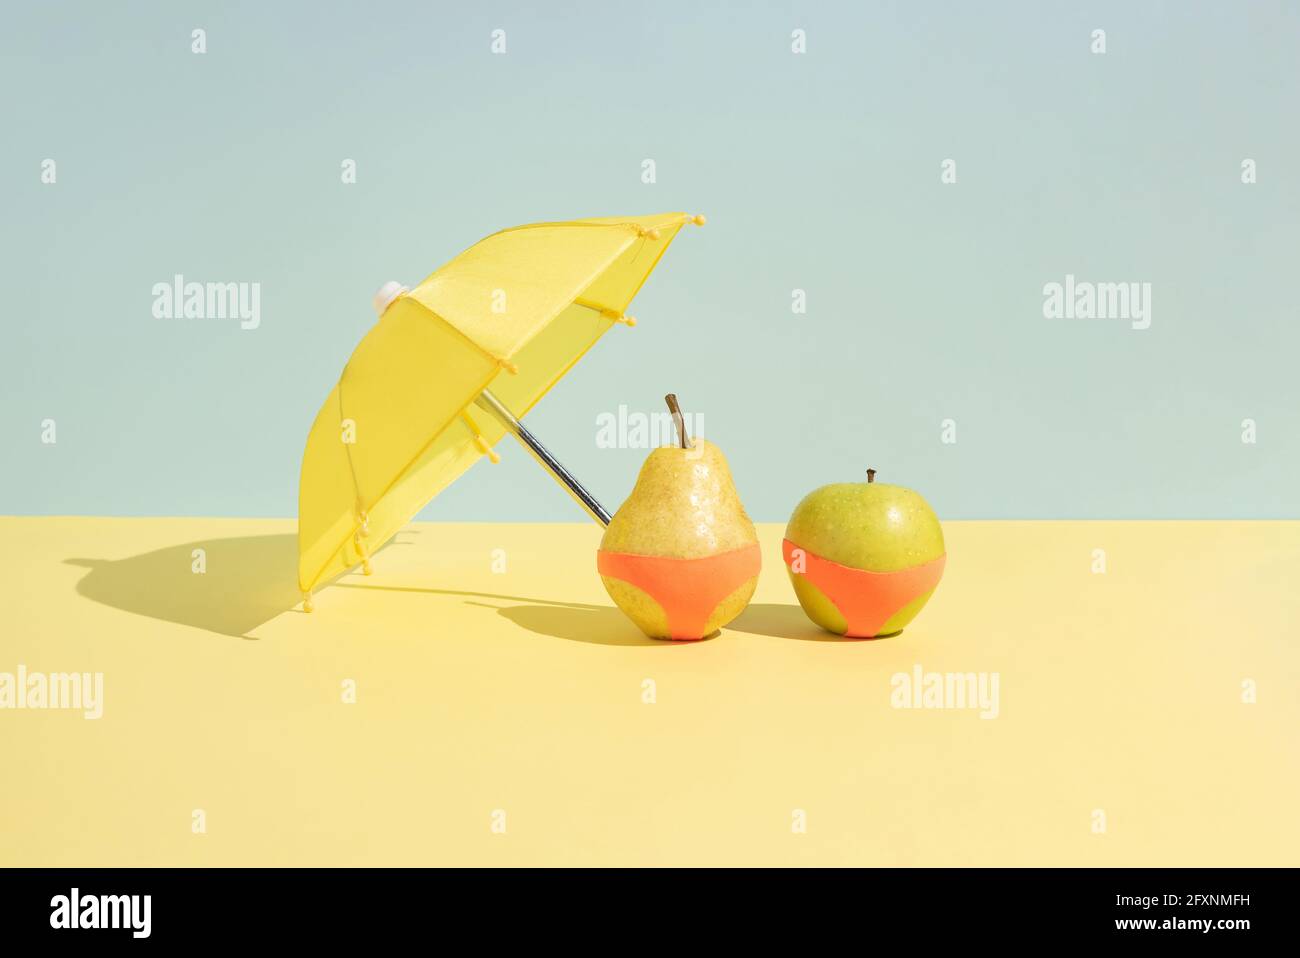 Summer fruit concept. Wet apple and a pear in monokini next to an umbrella isolated on a blue and yellow background. Abstract. Rectangle layout with c Stock Photo